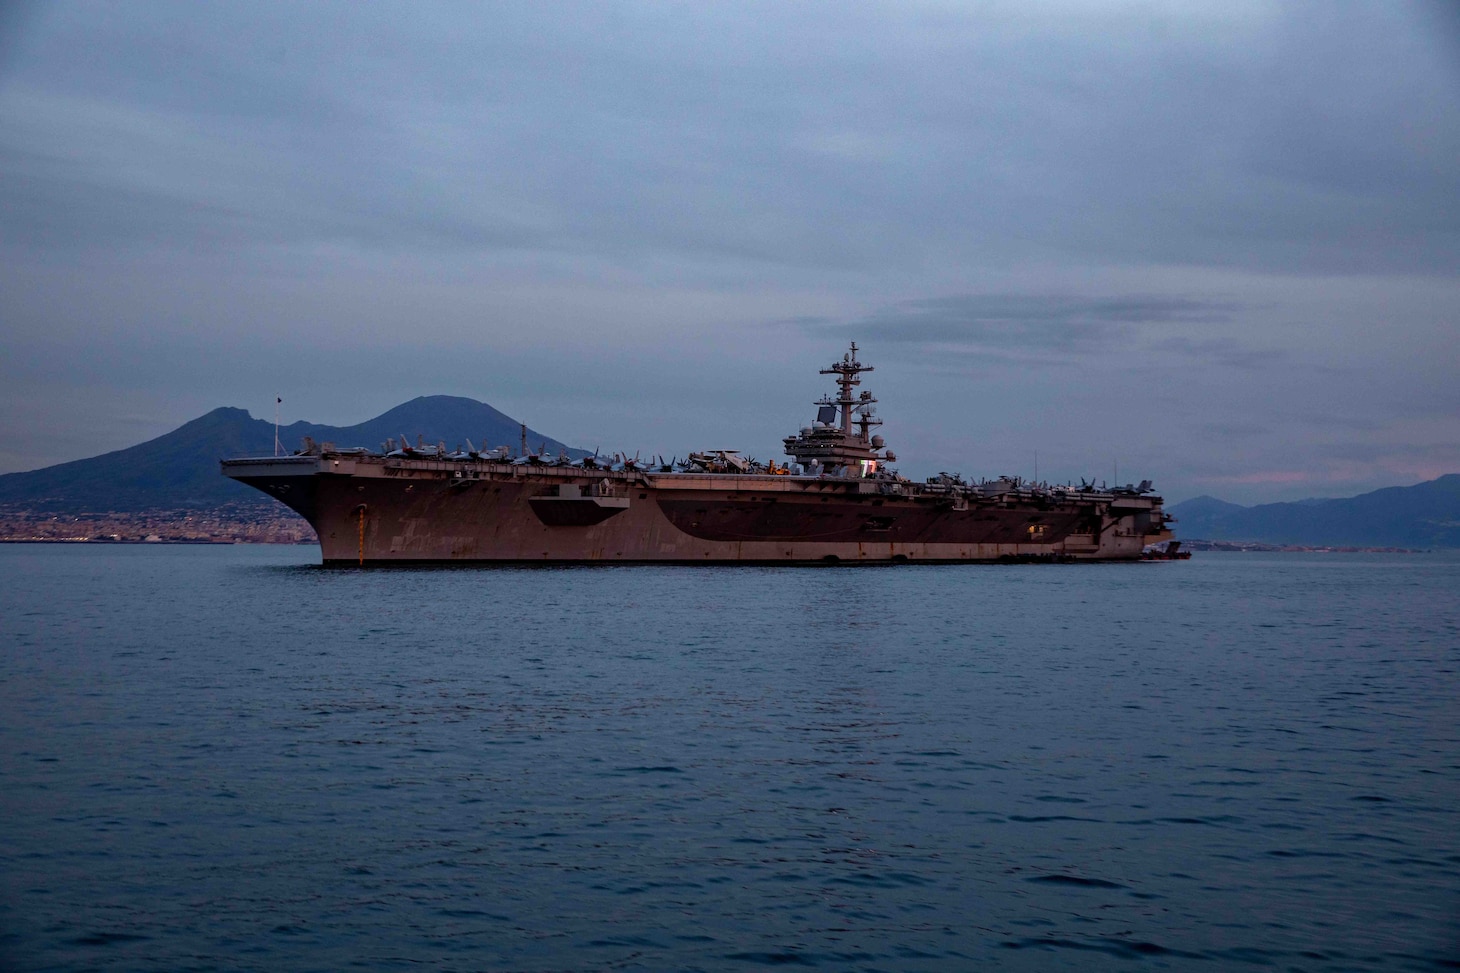 The Nimitz-class aircraft carrier USS George H.W. Bush (CVN 77), along with the embarked staff of Carrier Strike Group (CSG) 10, arrives in Naples, Italy, for a scheduled port visit Nov. 28, 2022.